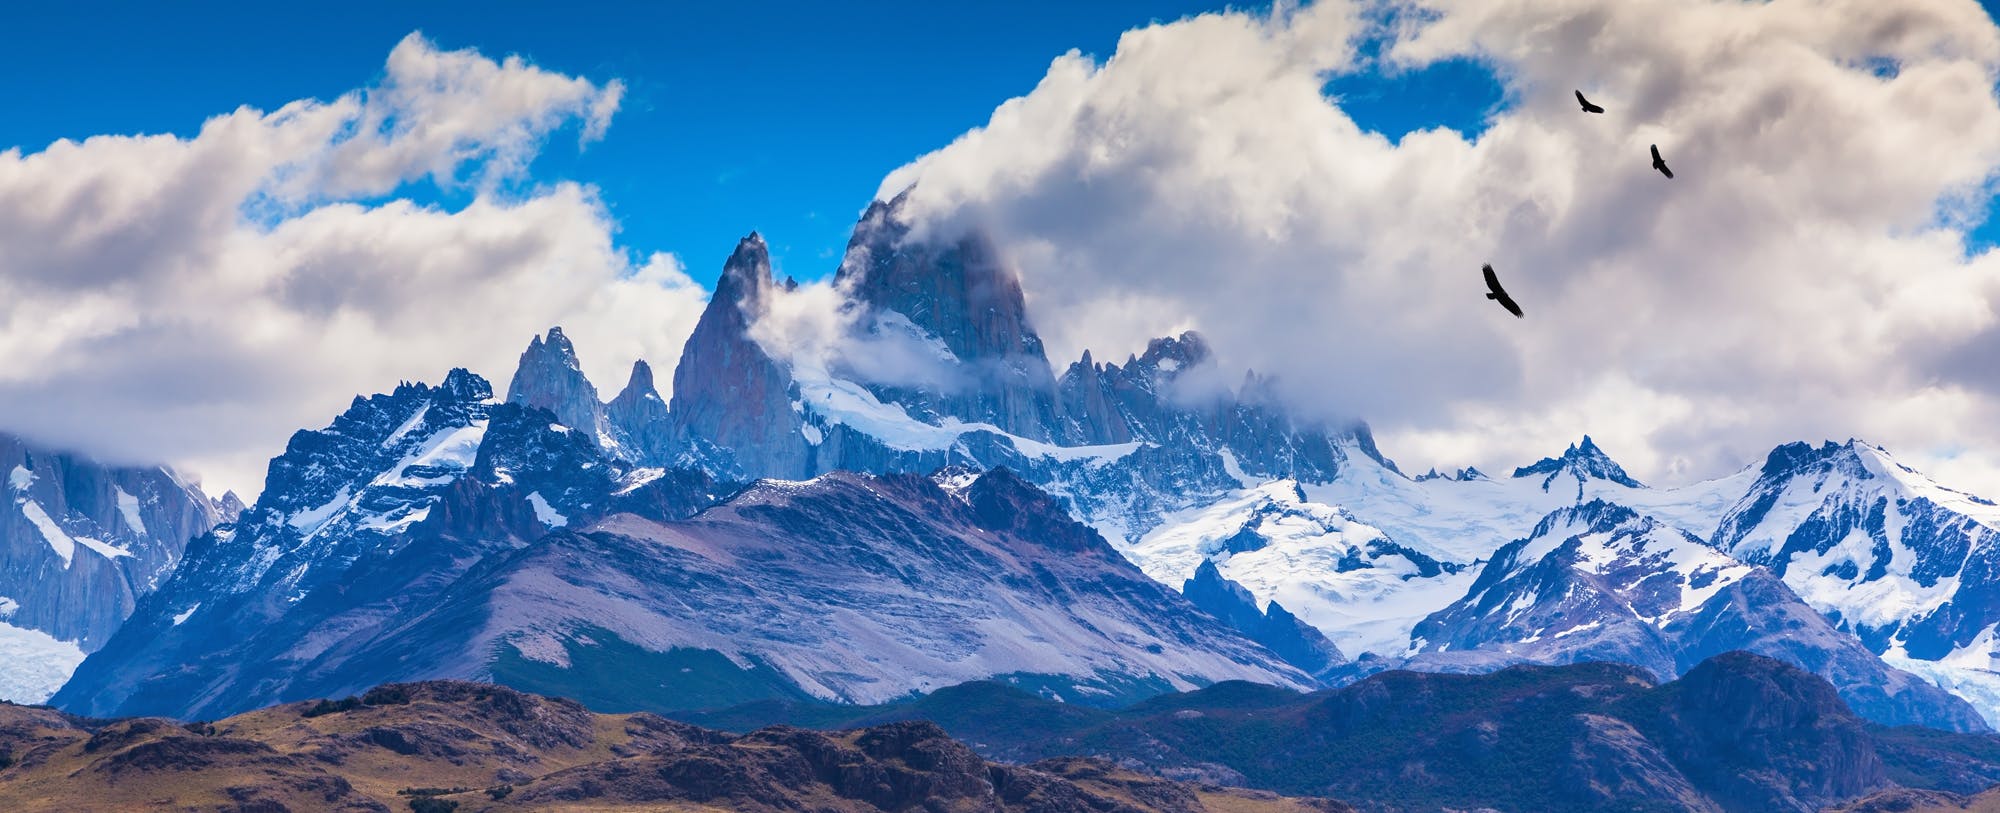 Fair Trade Certified: Patagonia Partners With Fair Trade USA